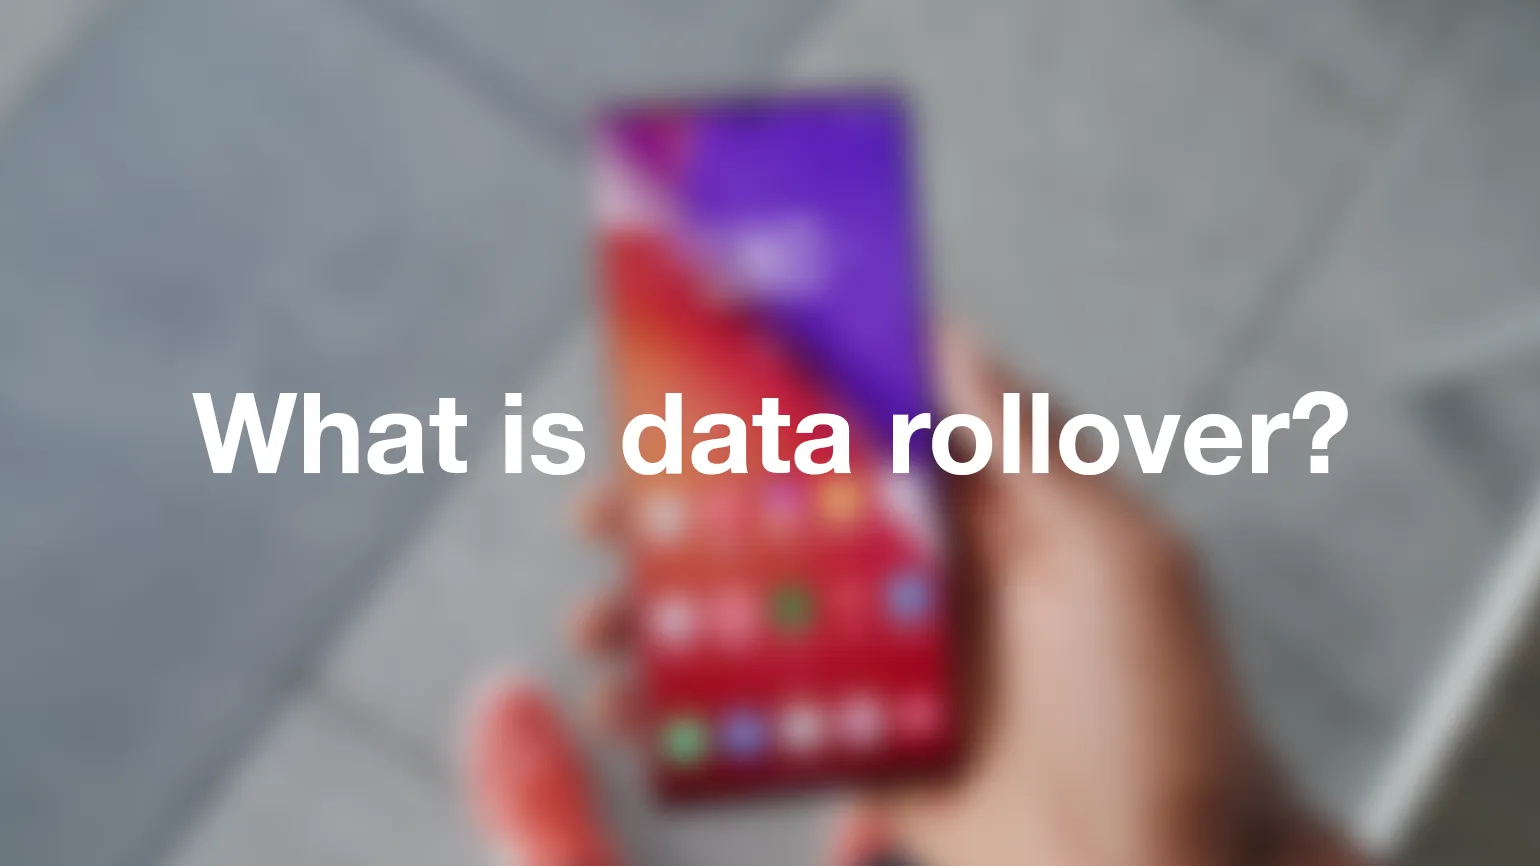 What is data rollover?